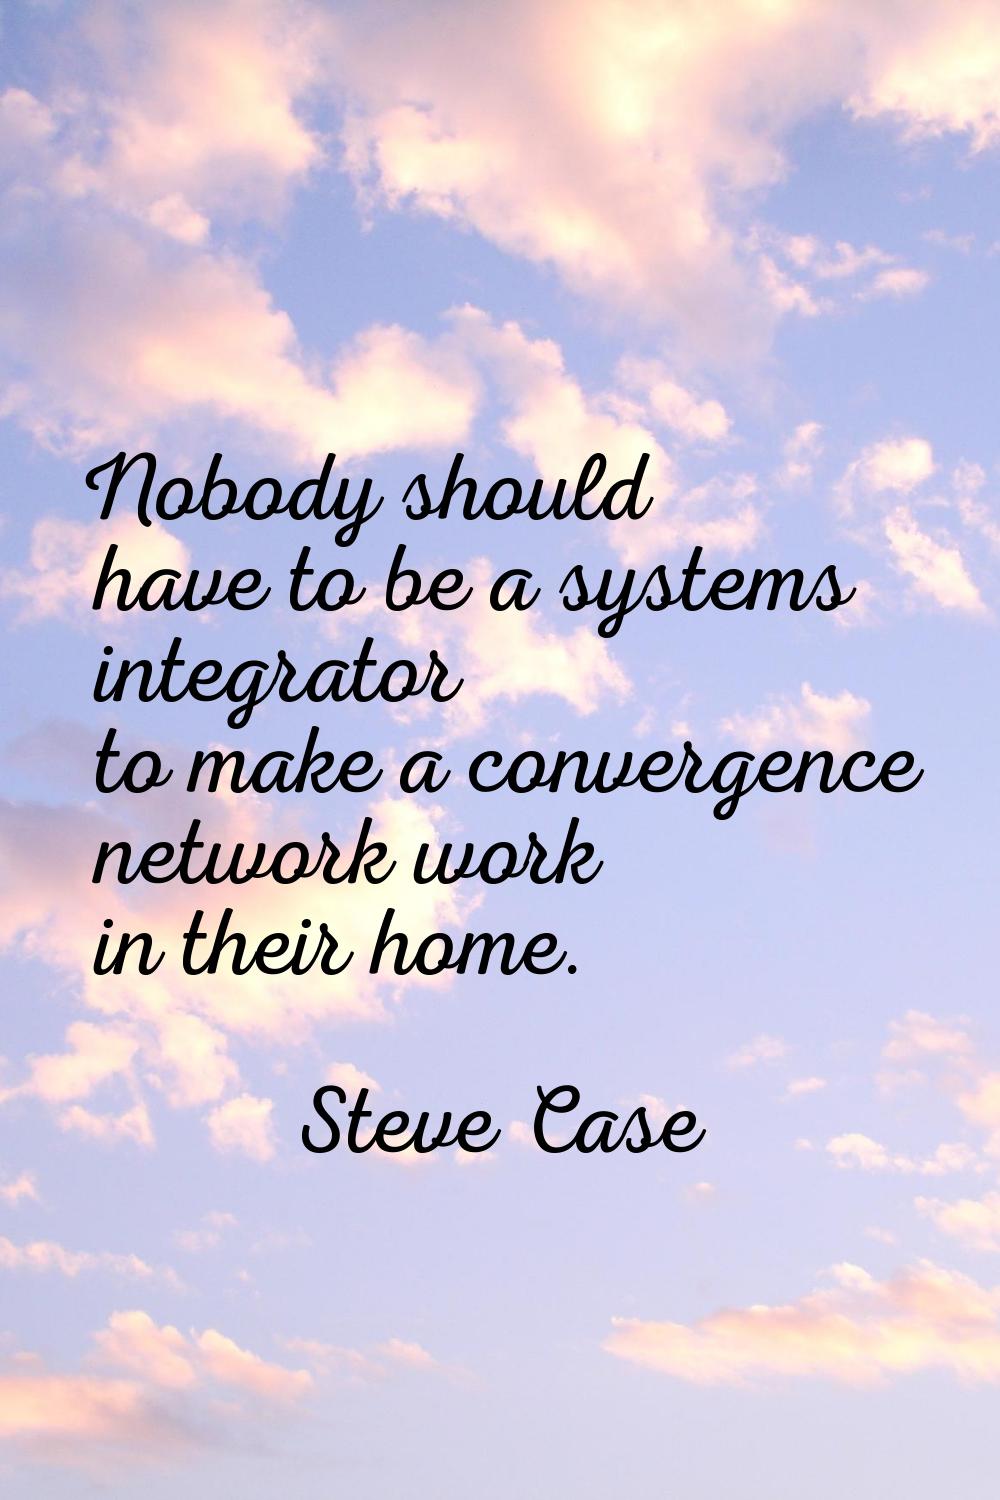 Nobody should have to be a systems integrator to make a convergence network work in their home.